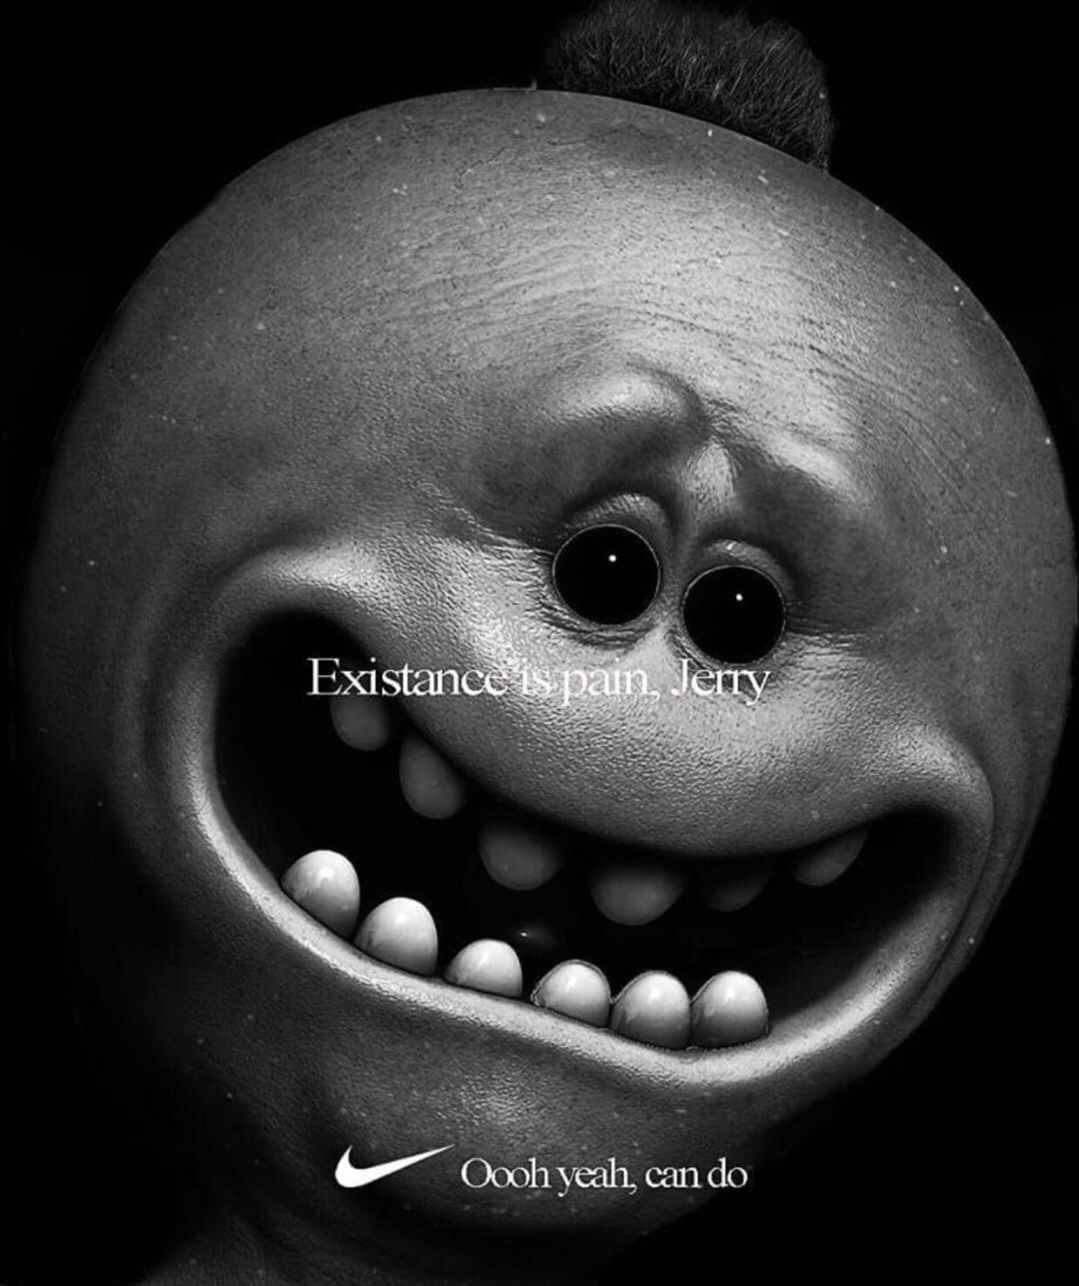 memes - nike parody memes - Existance is pain, Jerry Oooh yeah, can do